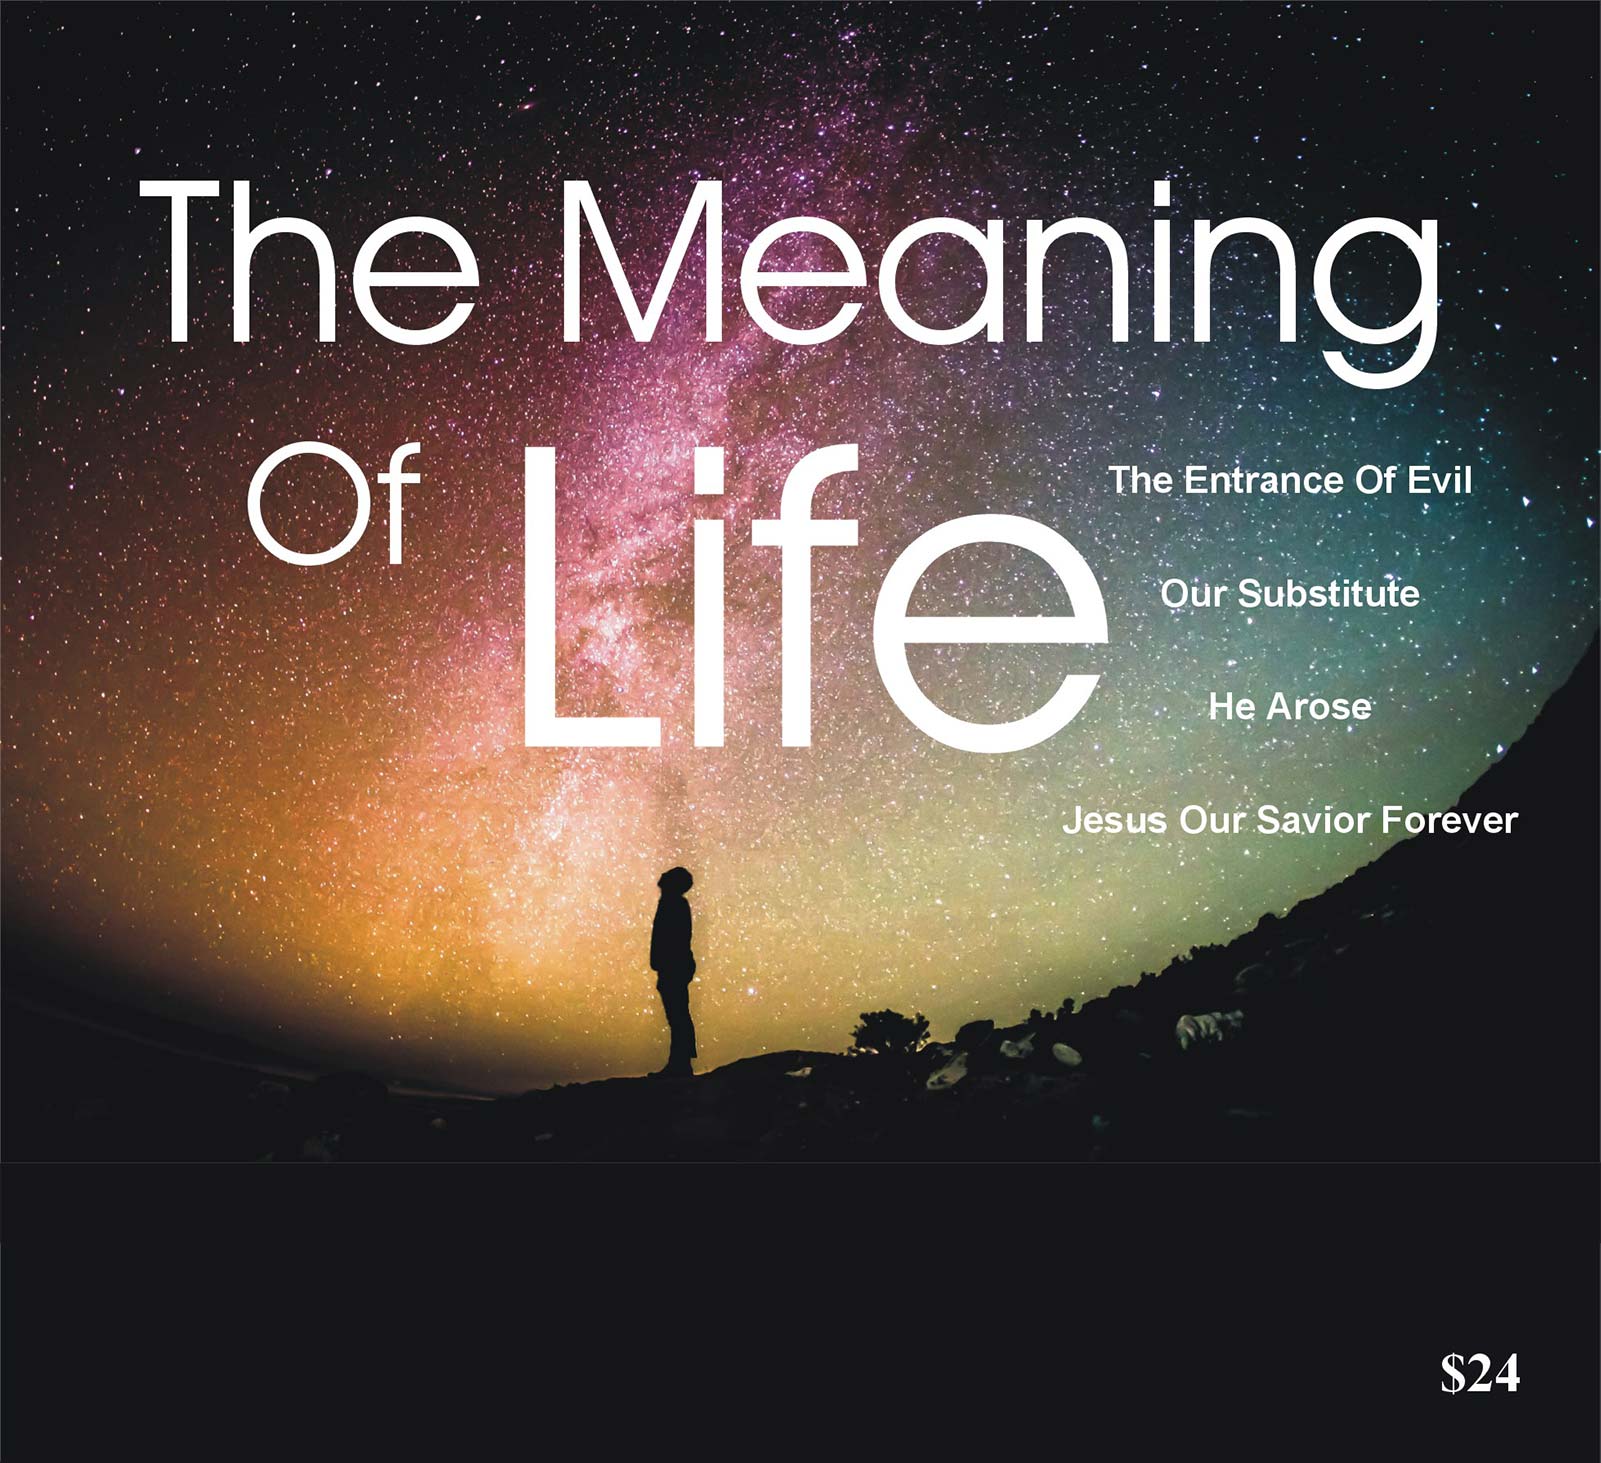 the meaning of life movie review